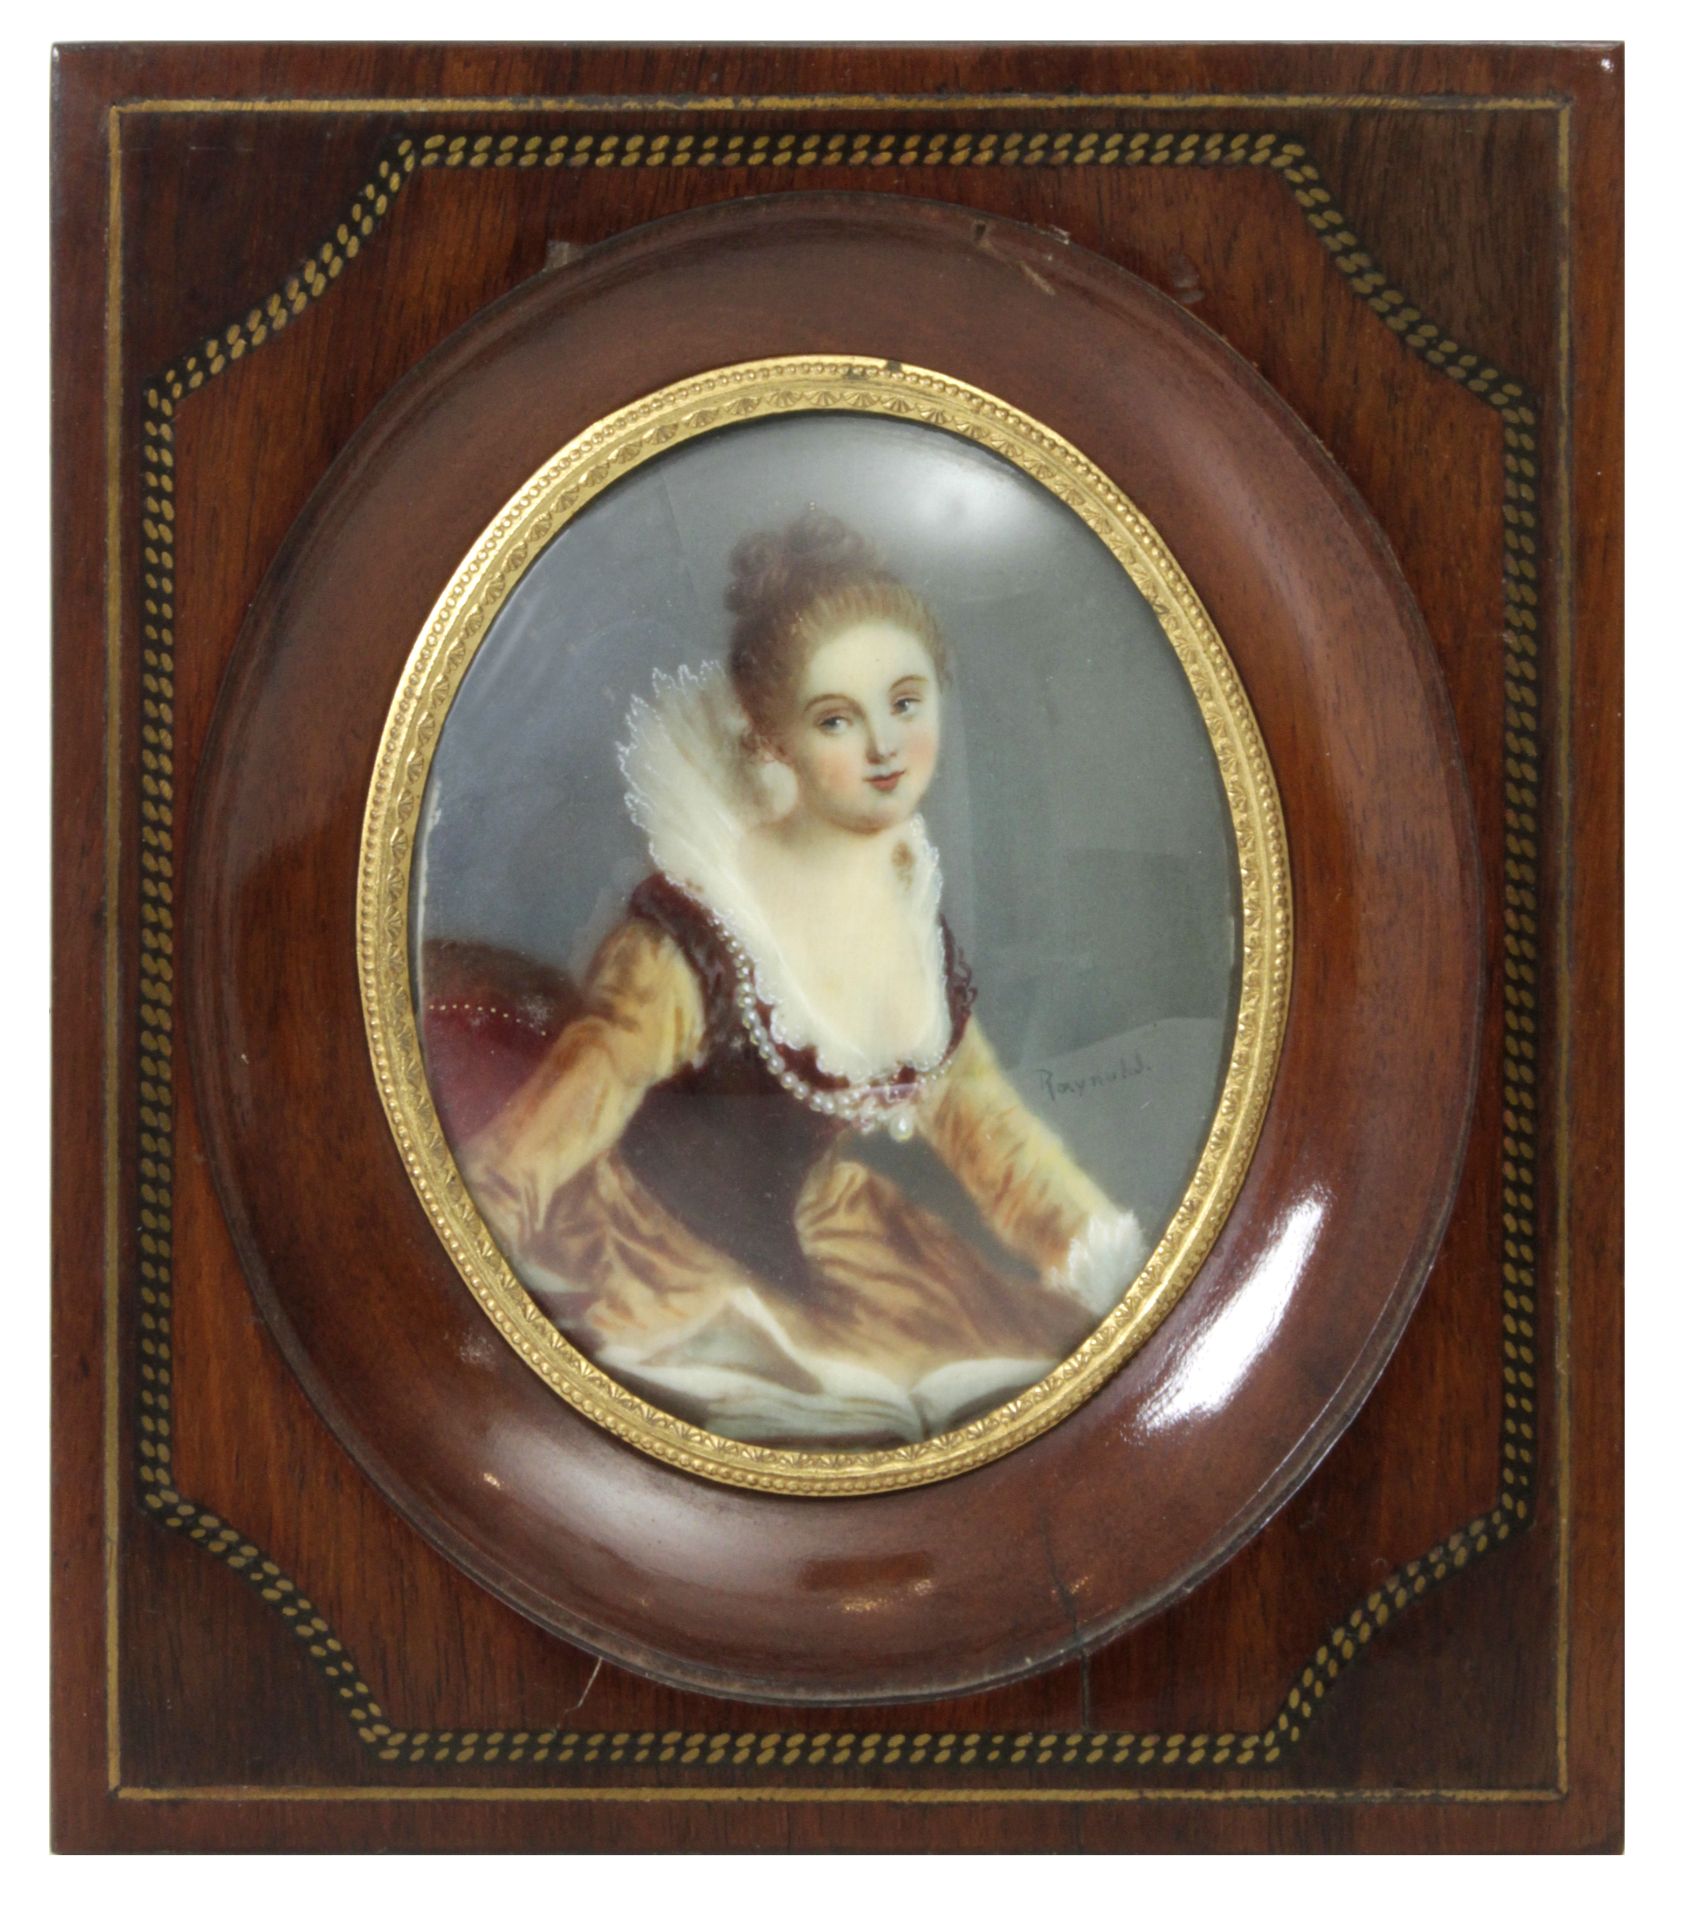 19th-20th centuries Spanish portrait miniature of a lady